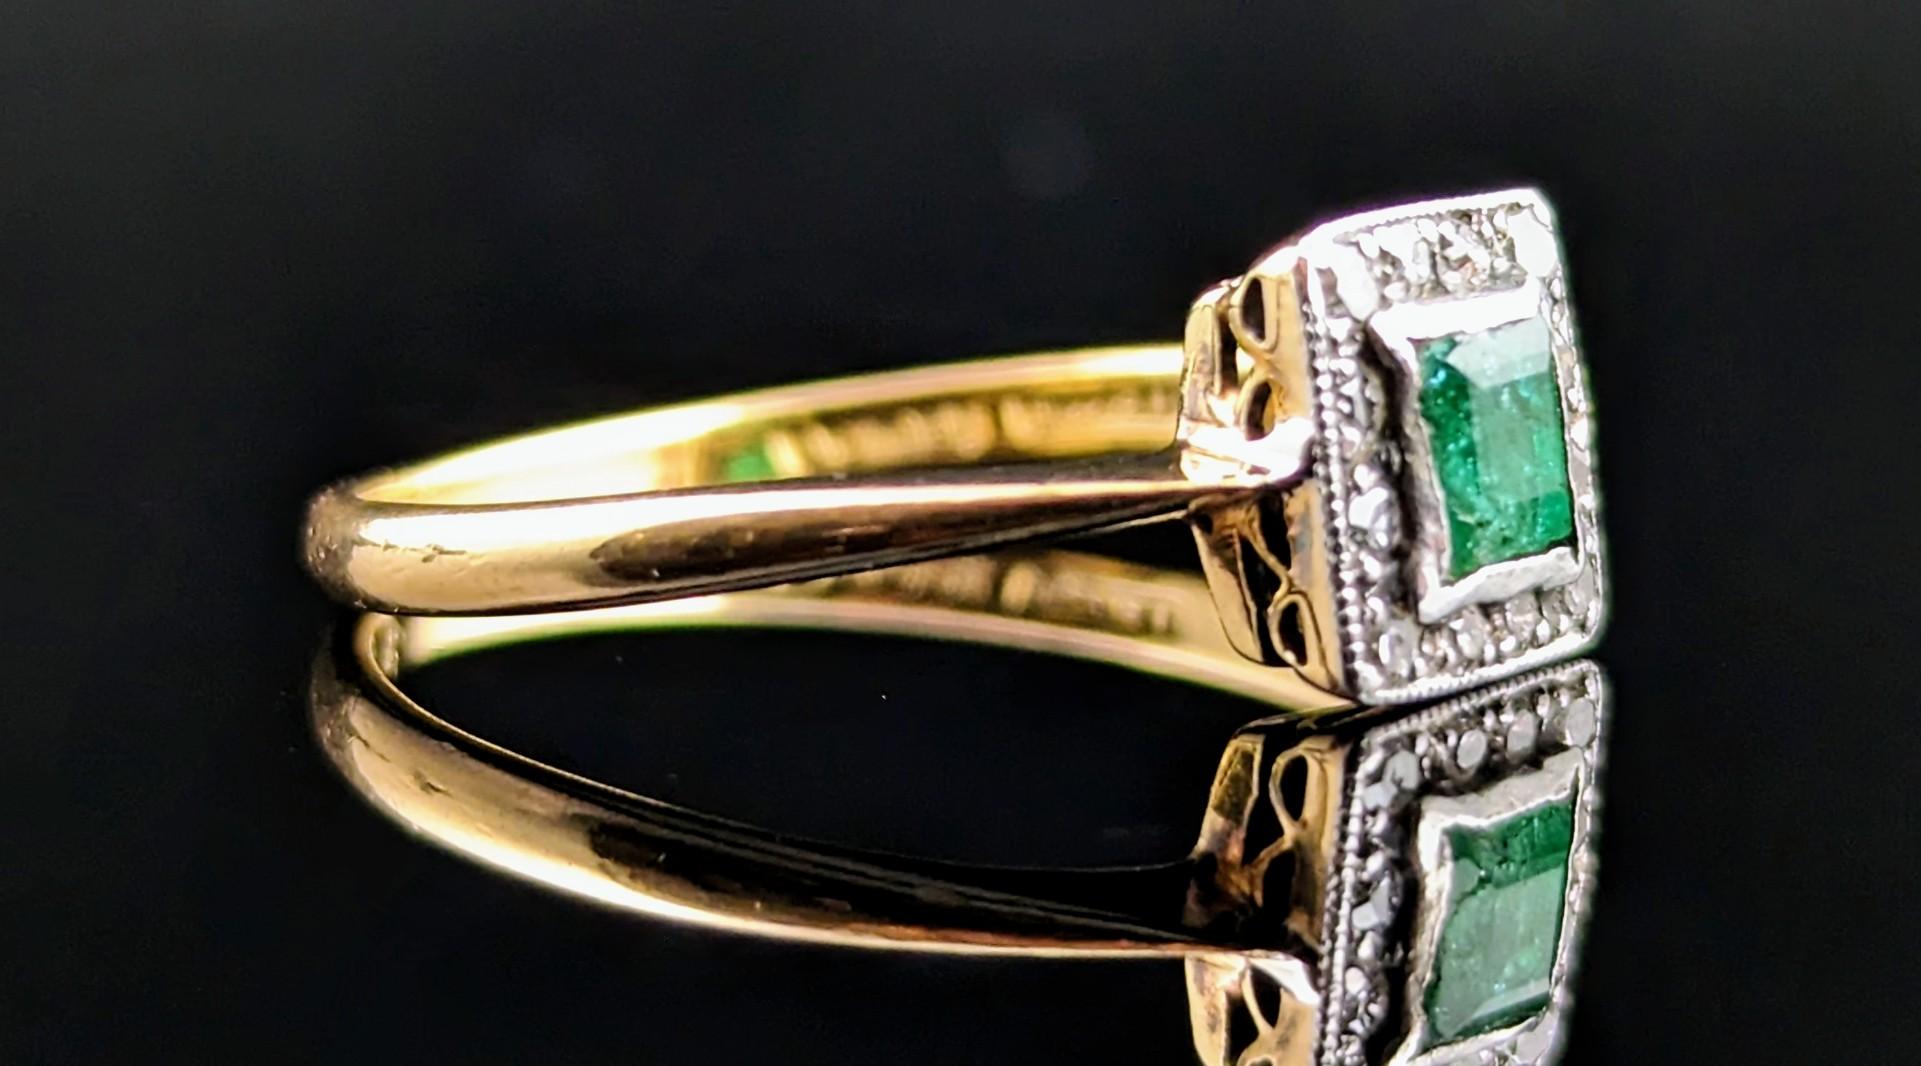 Vintage Art Deco Emerald and Diamond Ring, 18k Gold and Platinum 3